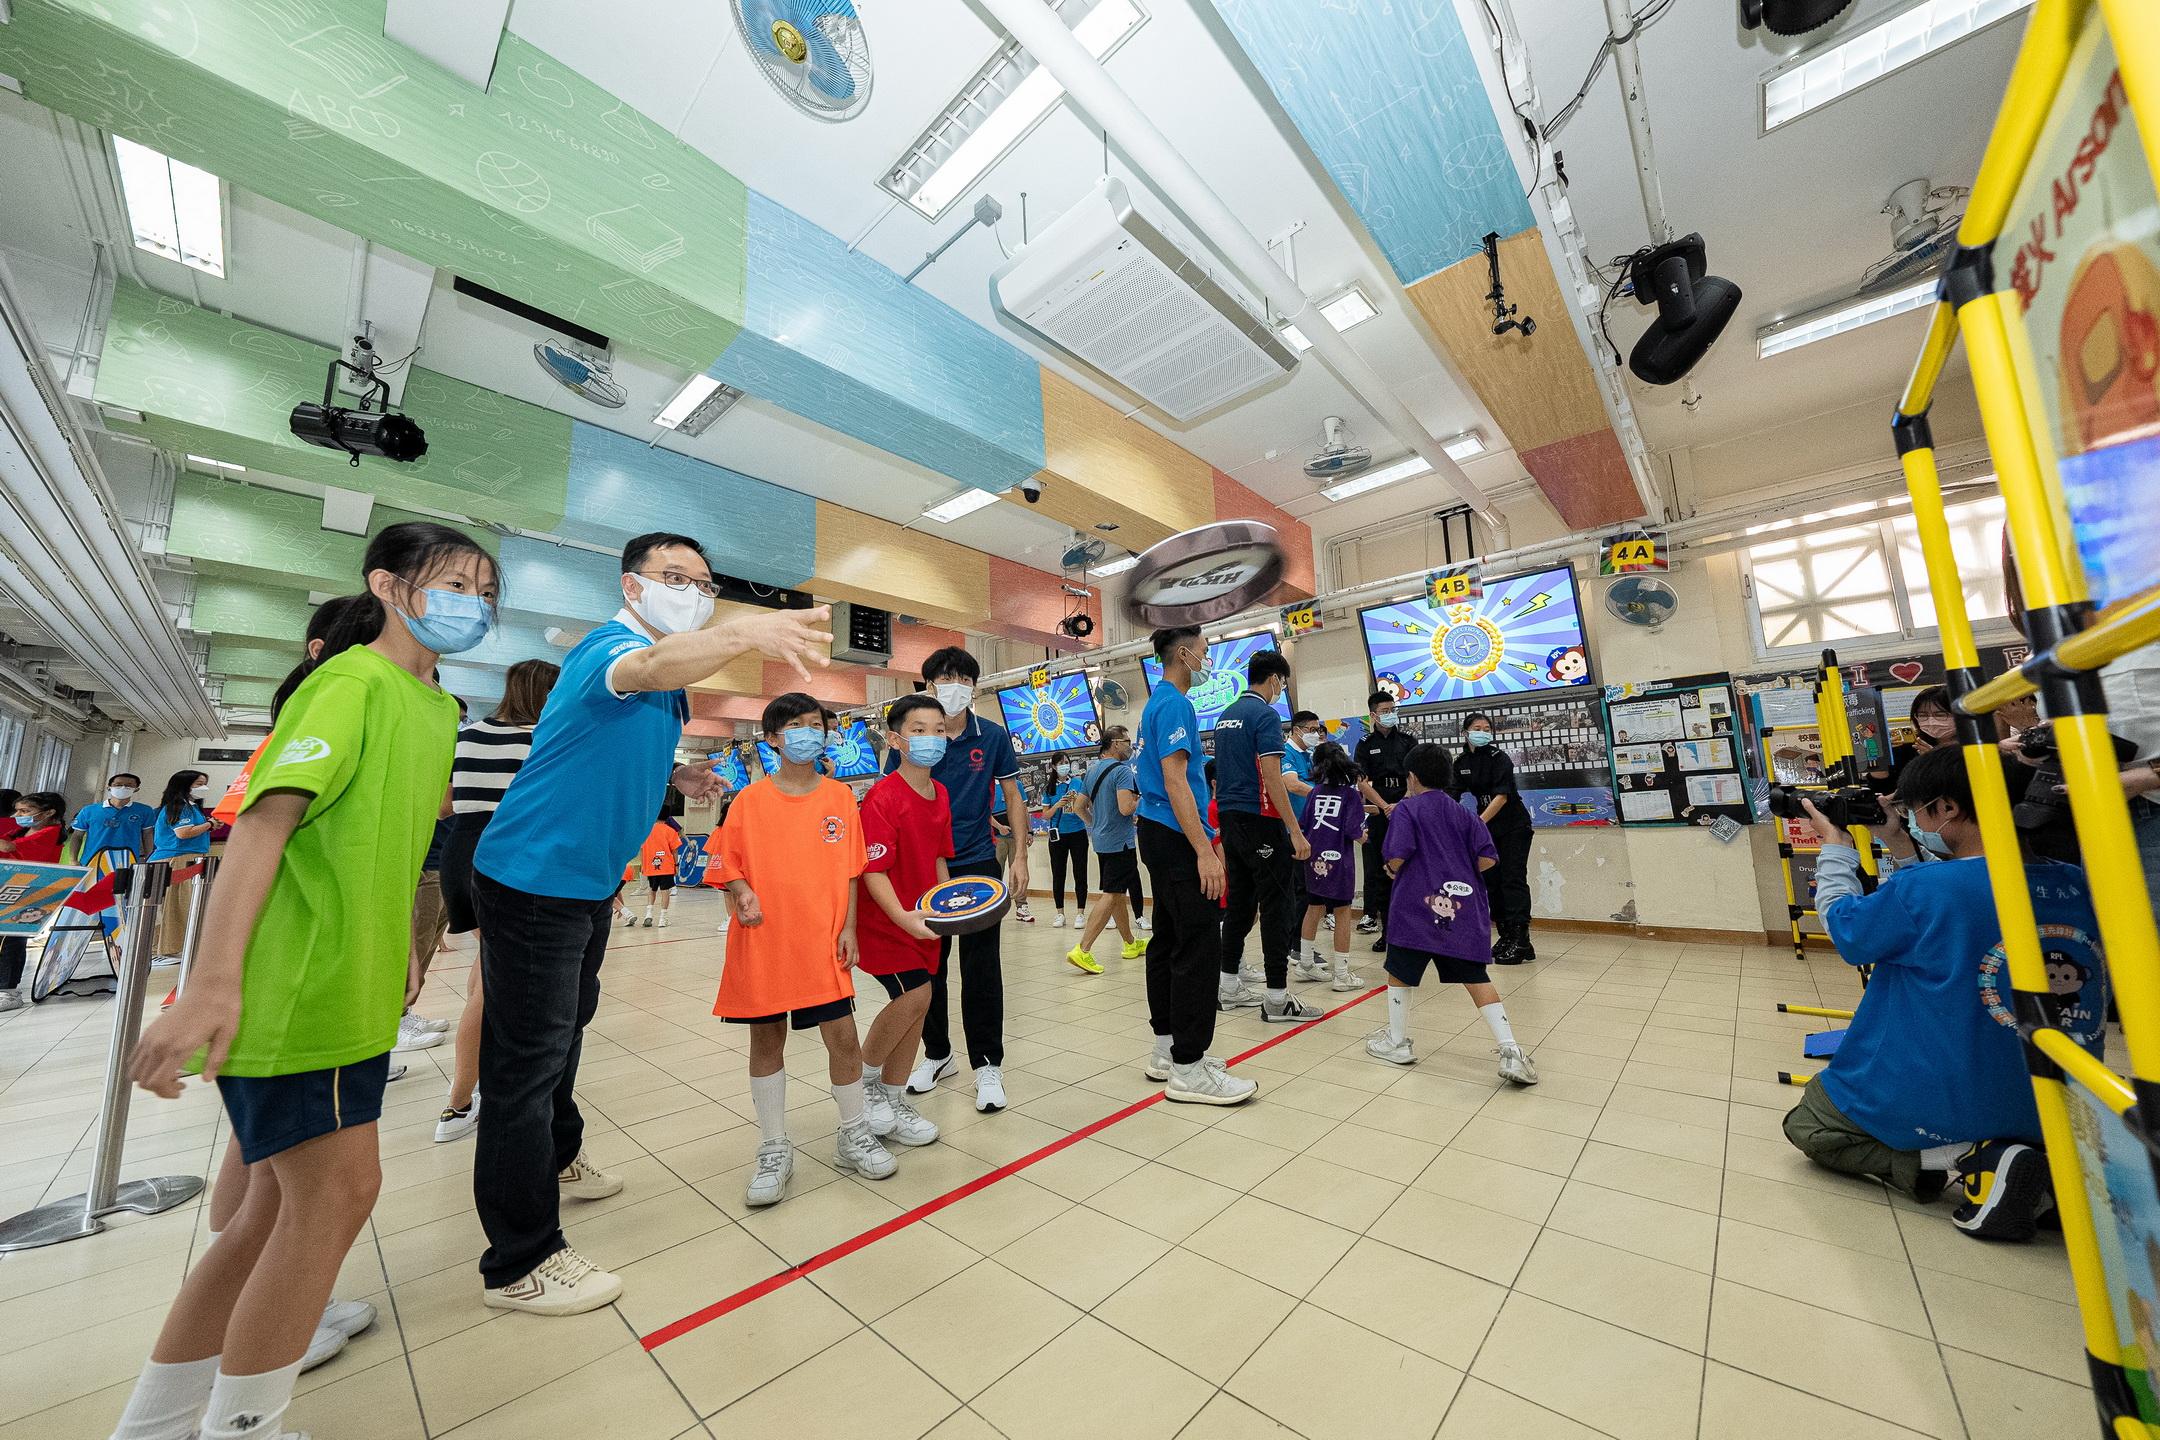 The Correctional Services Department held the kick-off ceremony of its brand-new community education activity "Rehabilitation Express" today (November 11). Photo shows the Commissioner of Correctional Services, Mr Wong Kwok-hing (second left), playing dodgebee with students.